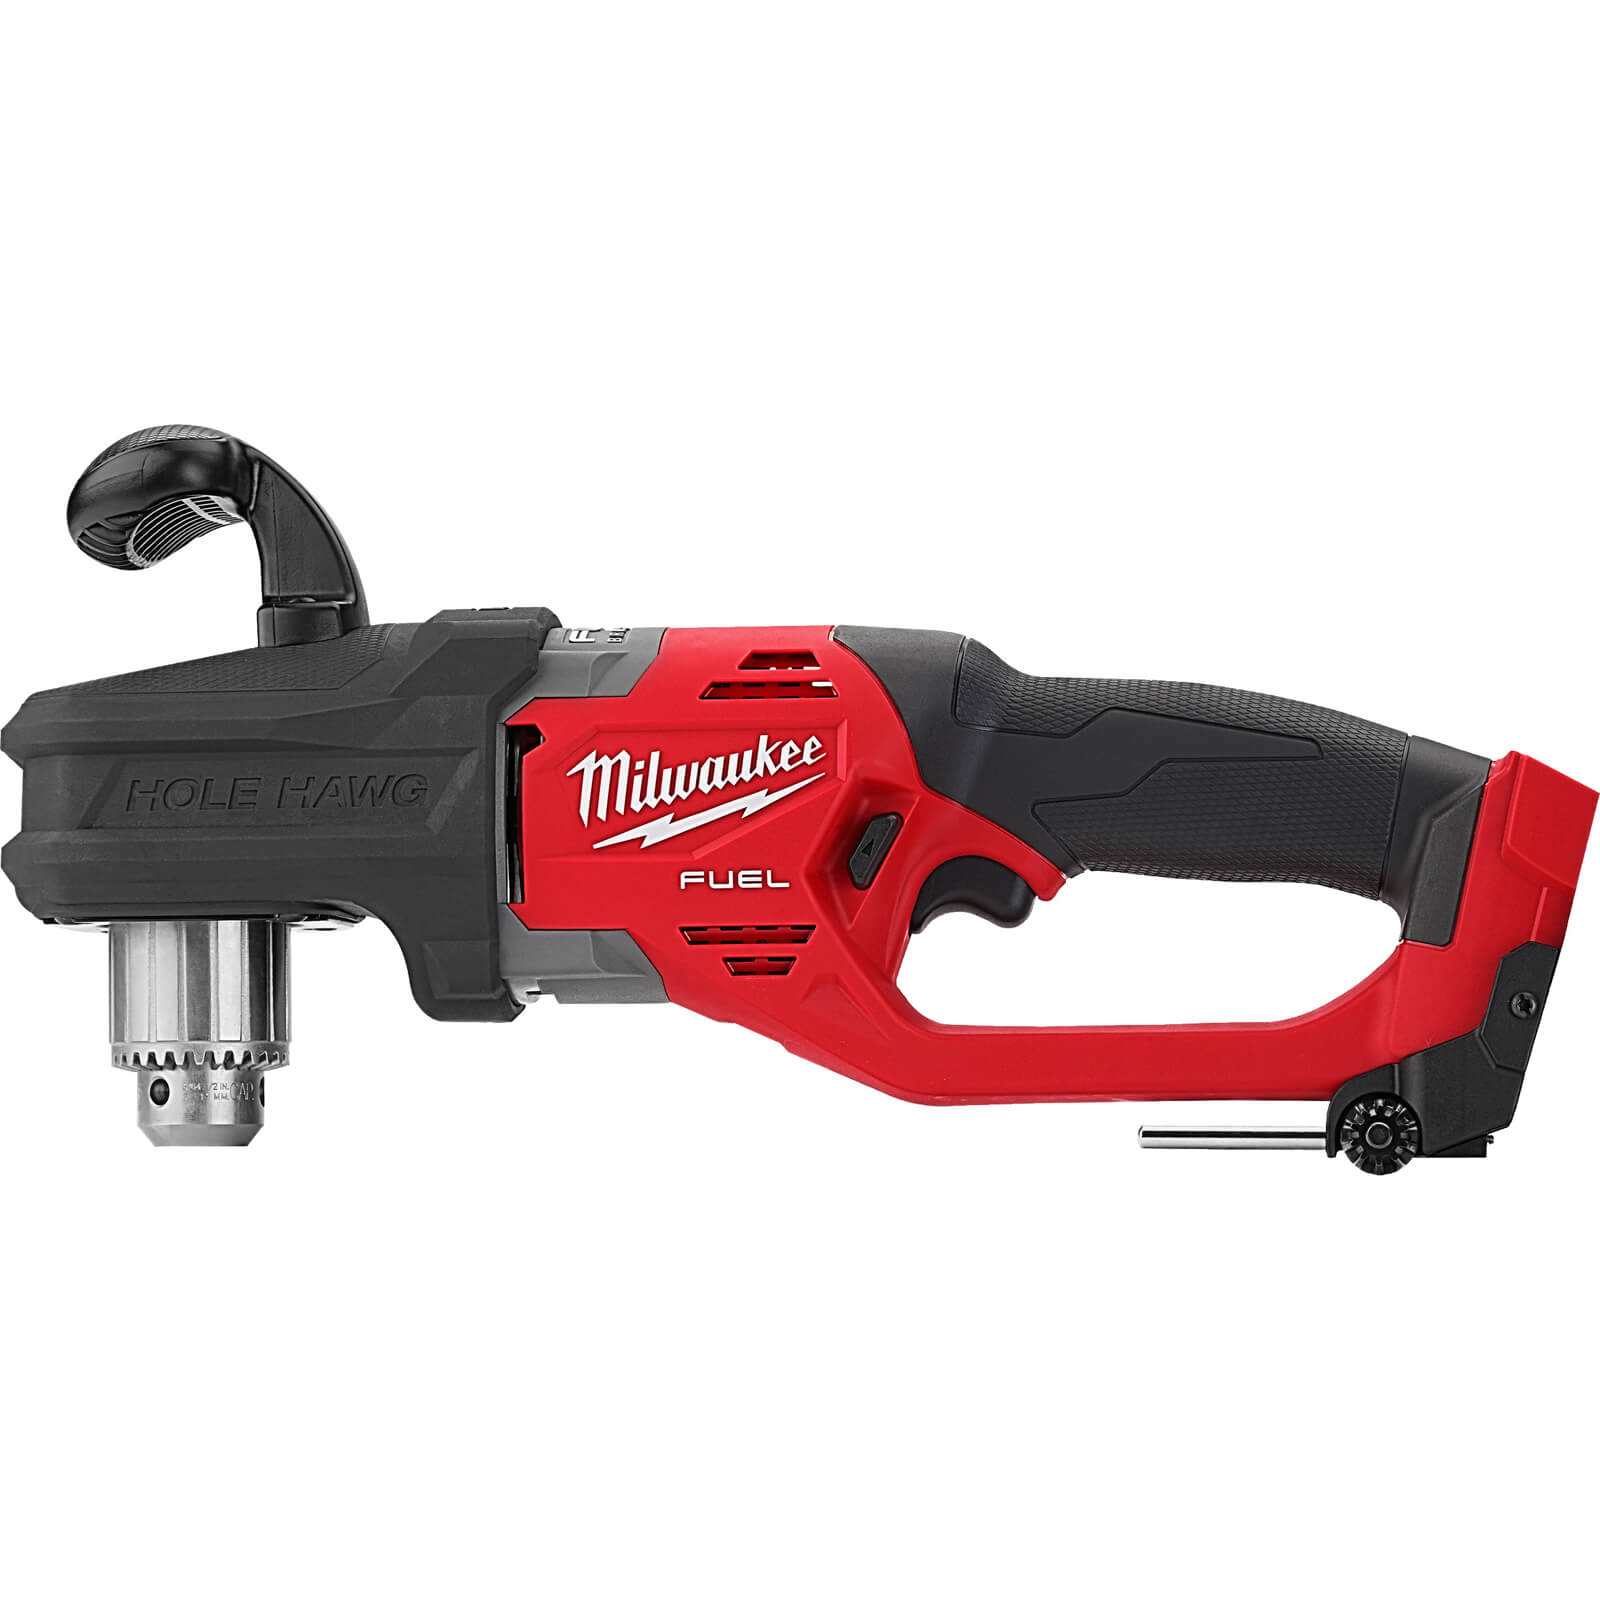 Milwaukee M18 CRAD2 Fuel 18v Cordless Brushless Hole Hawg Angle Drill No Batteries No Charger Case